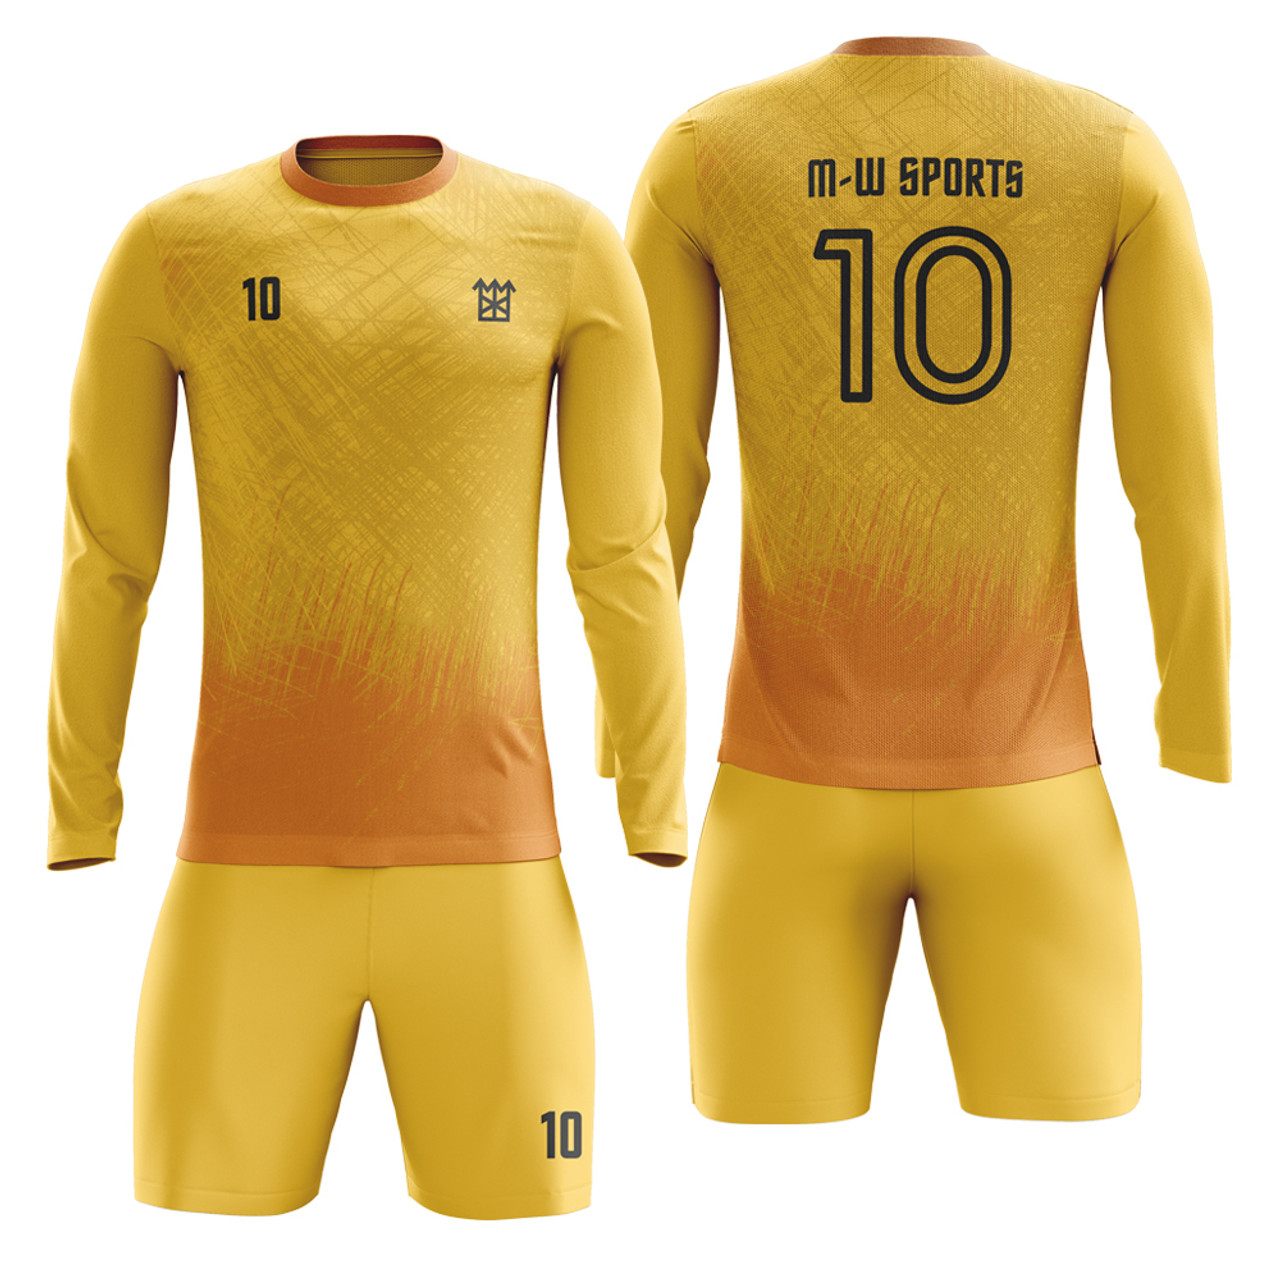  Victory long-sleeve soccer goalie jersey customized with your  name and number : Clothing, Shoes & Jewelry